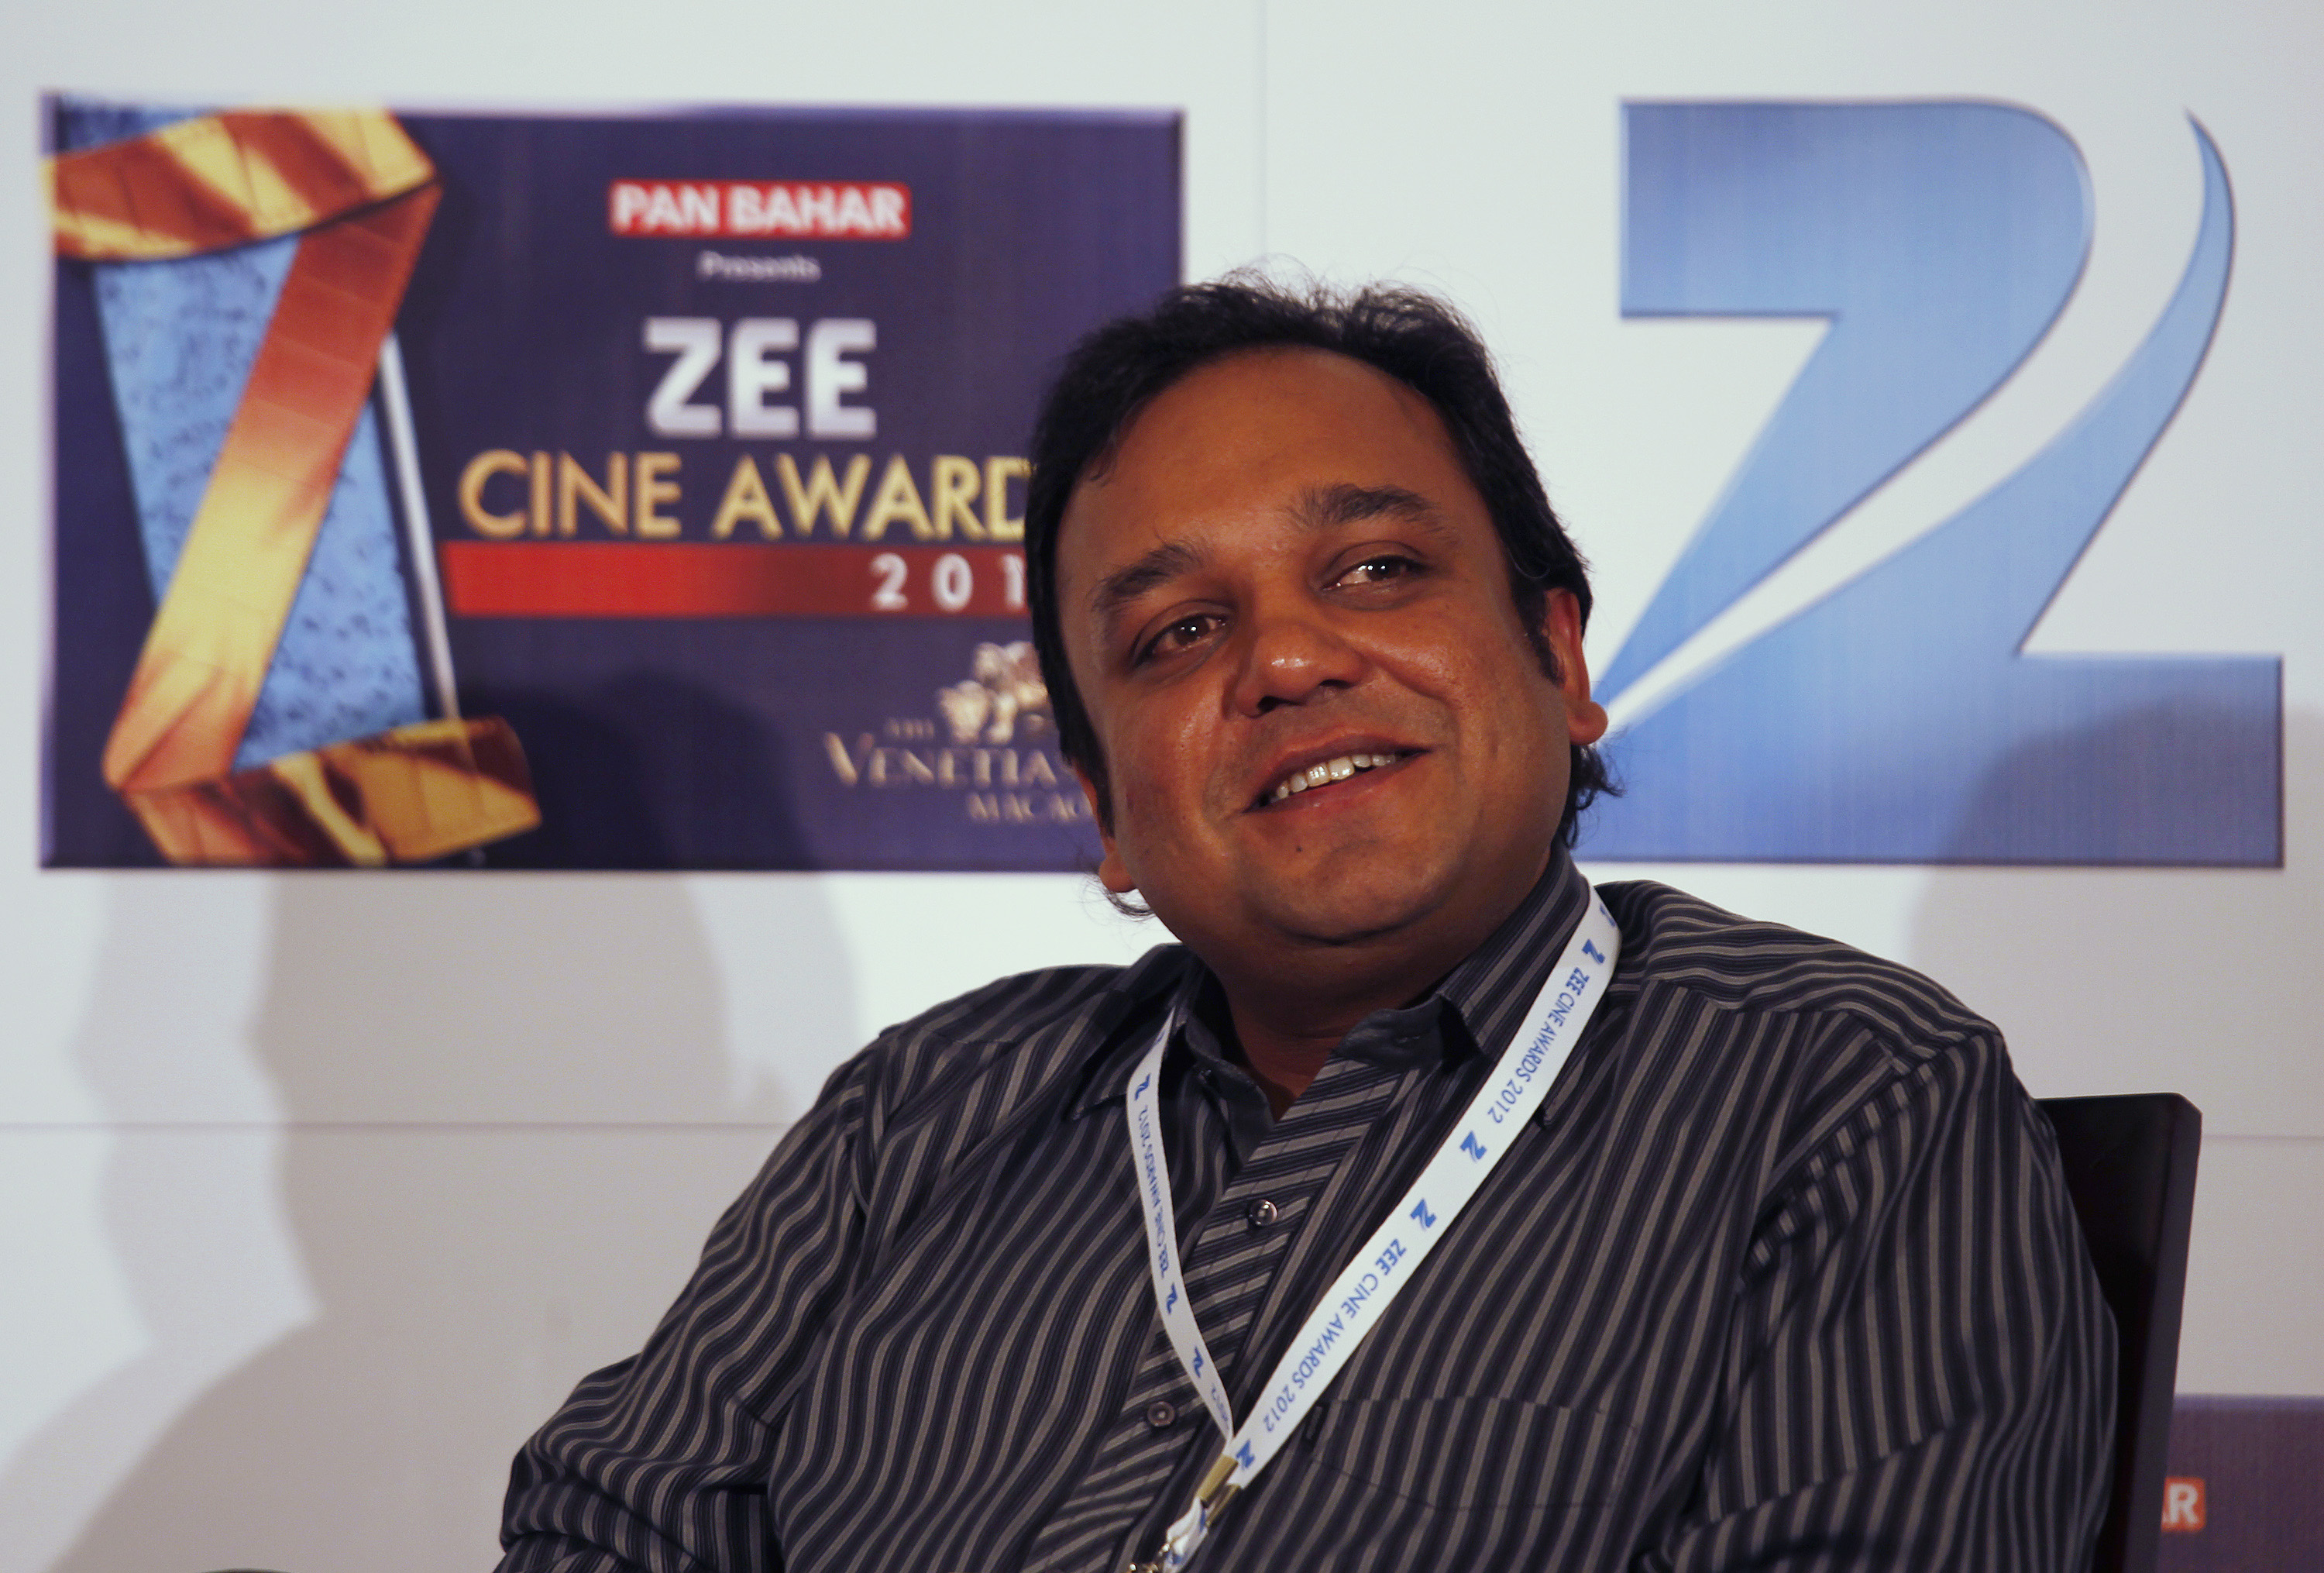 Goenka, CEO and MD of Zee Entertainment Enterprises, attends news conference before Zee Cine Awards in Macau